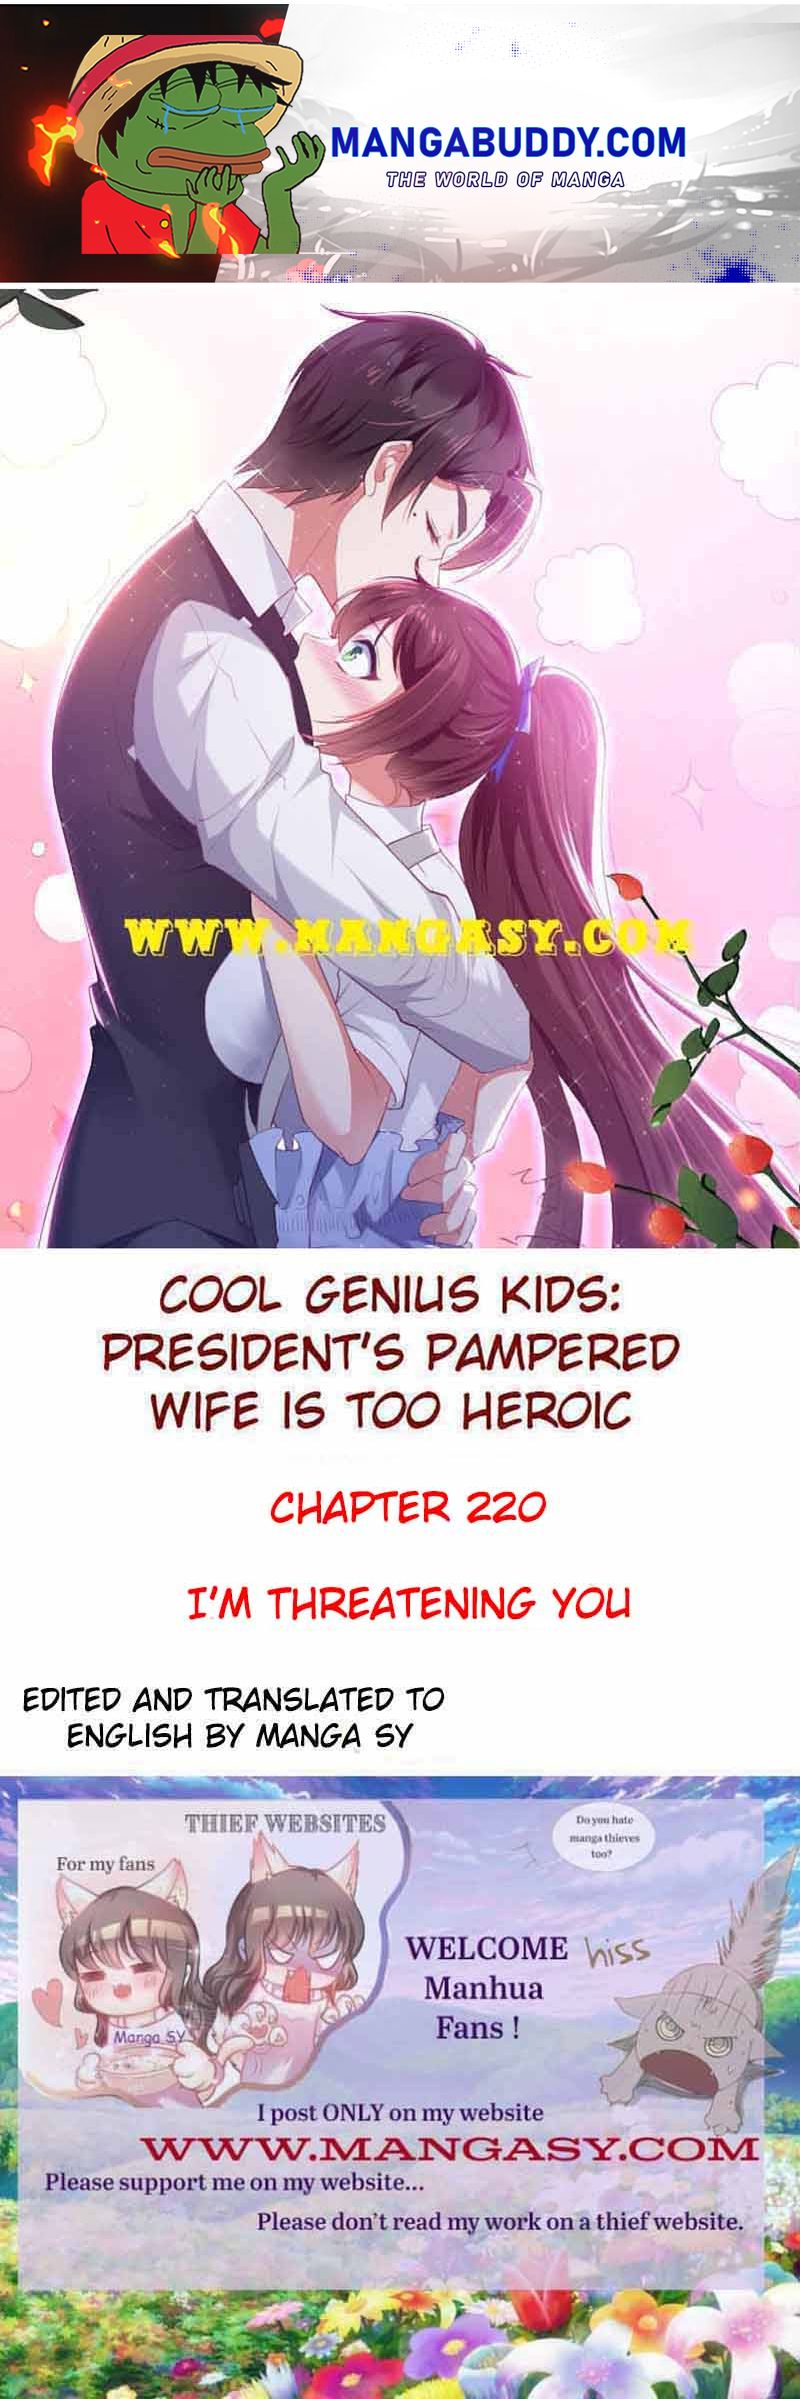 The Young Smart Kids-President’S Pampered Wife Is Too Heroic - Page 1